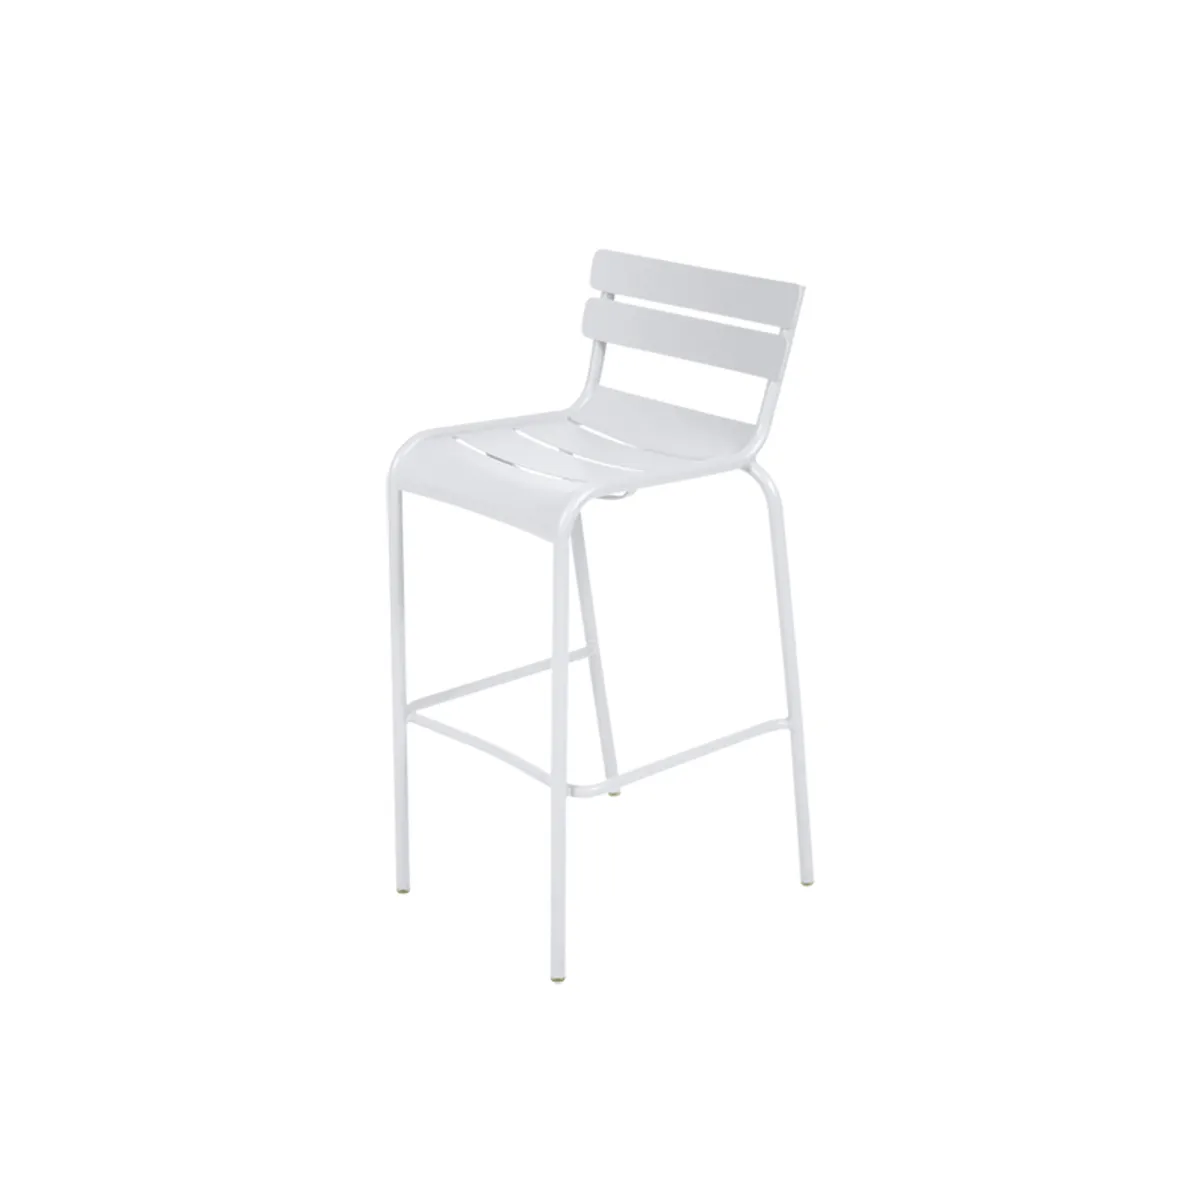 Luxembourg High Stool Furniture For Outdoor Cafe And Bars White